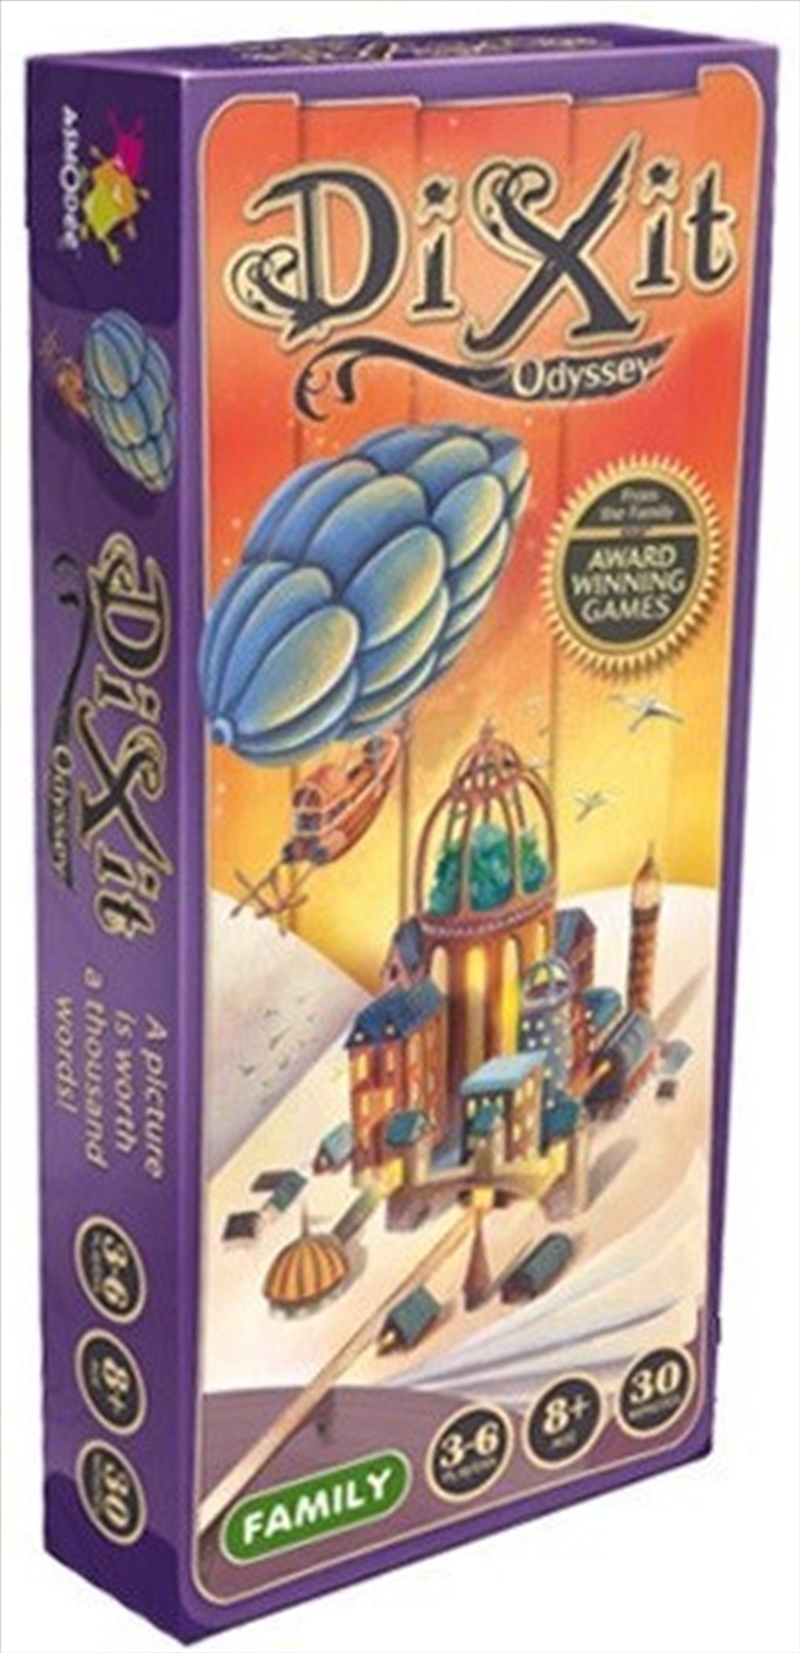 Dixit Odyssey Expansion/Product Detail/Board Games